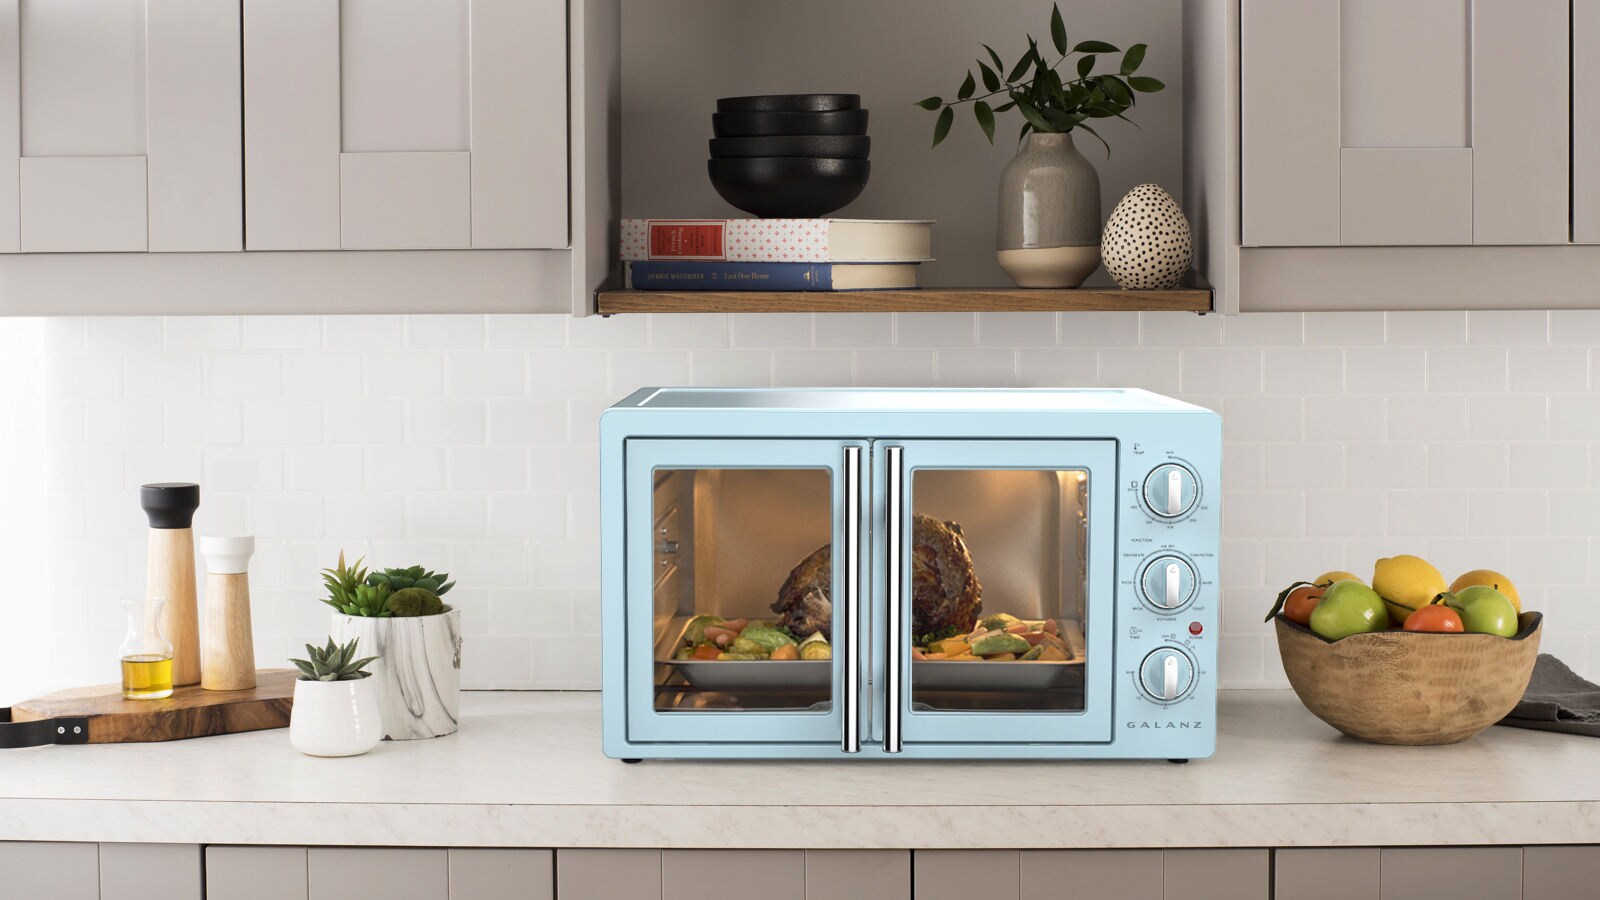 Galanz French Door Toaster Oven  Would you like to have a toaster oven  with cool French Doors? Take a look at our full product video for our French  Door Toaster Oven